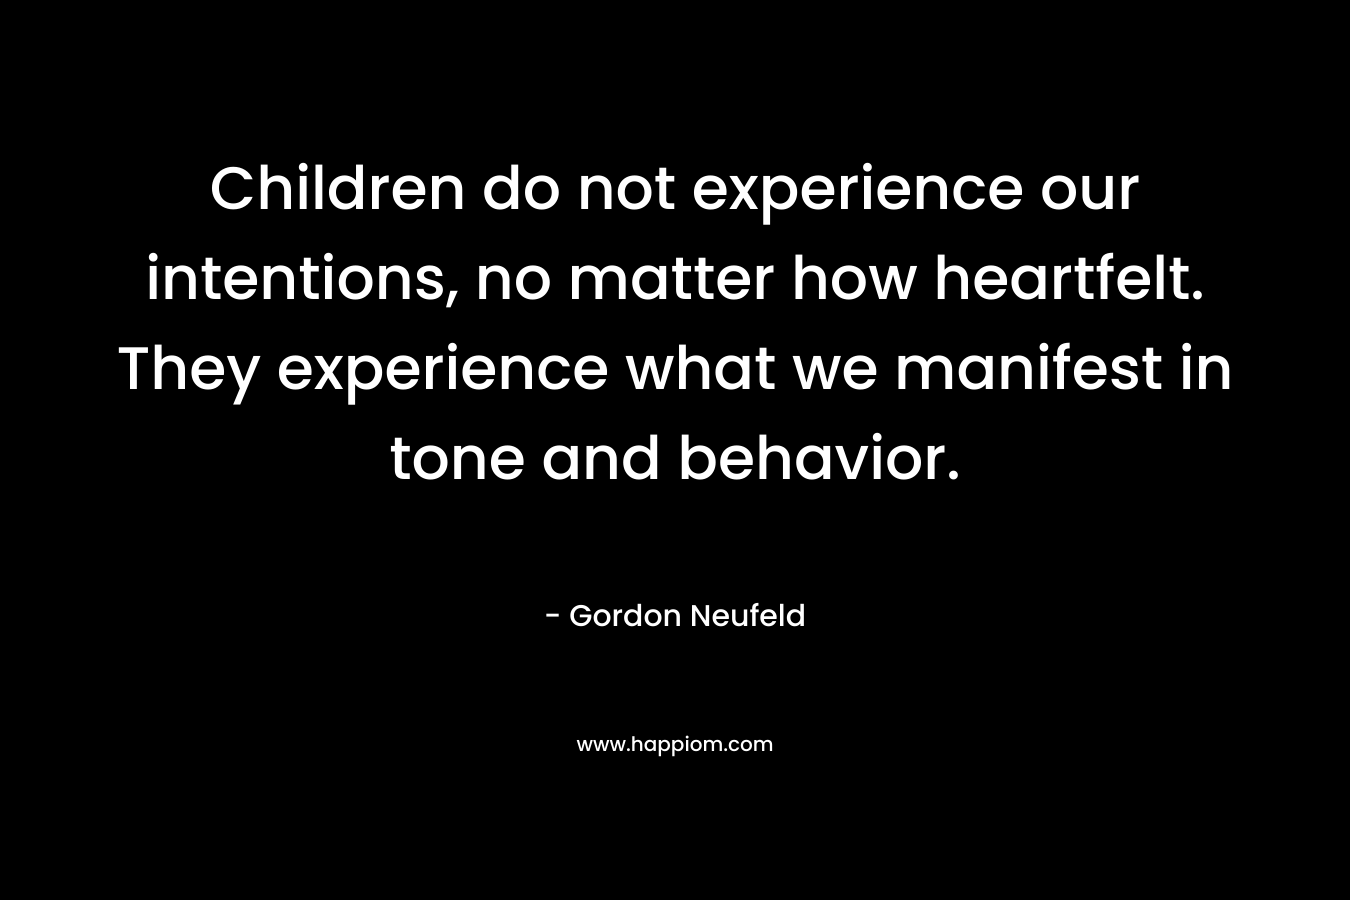 Children do not experience our intentions, no matter how heartfelt. They experience what we manifest in tone and behavior.